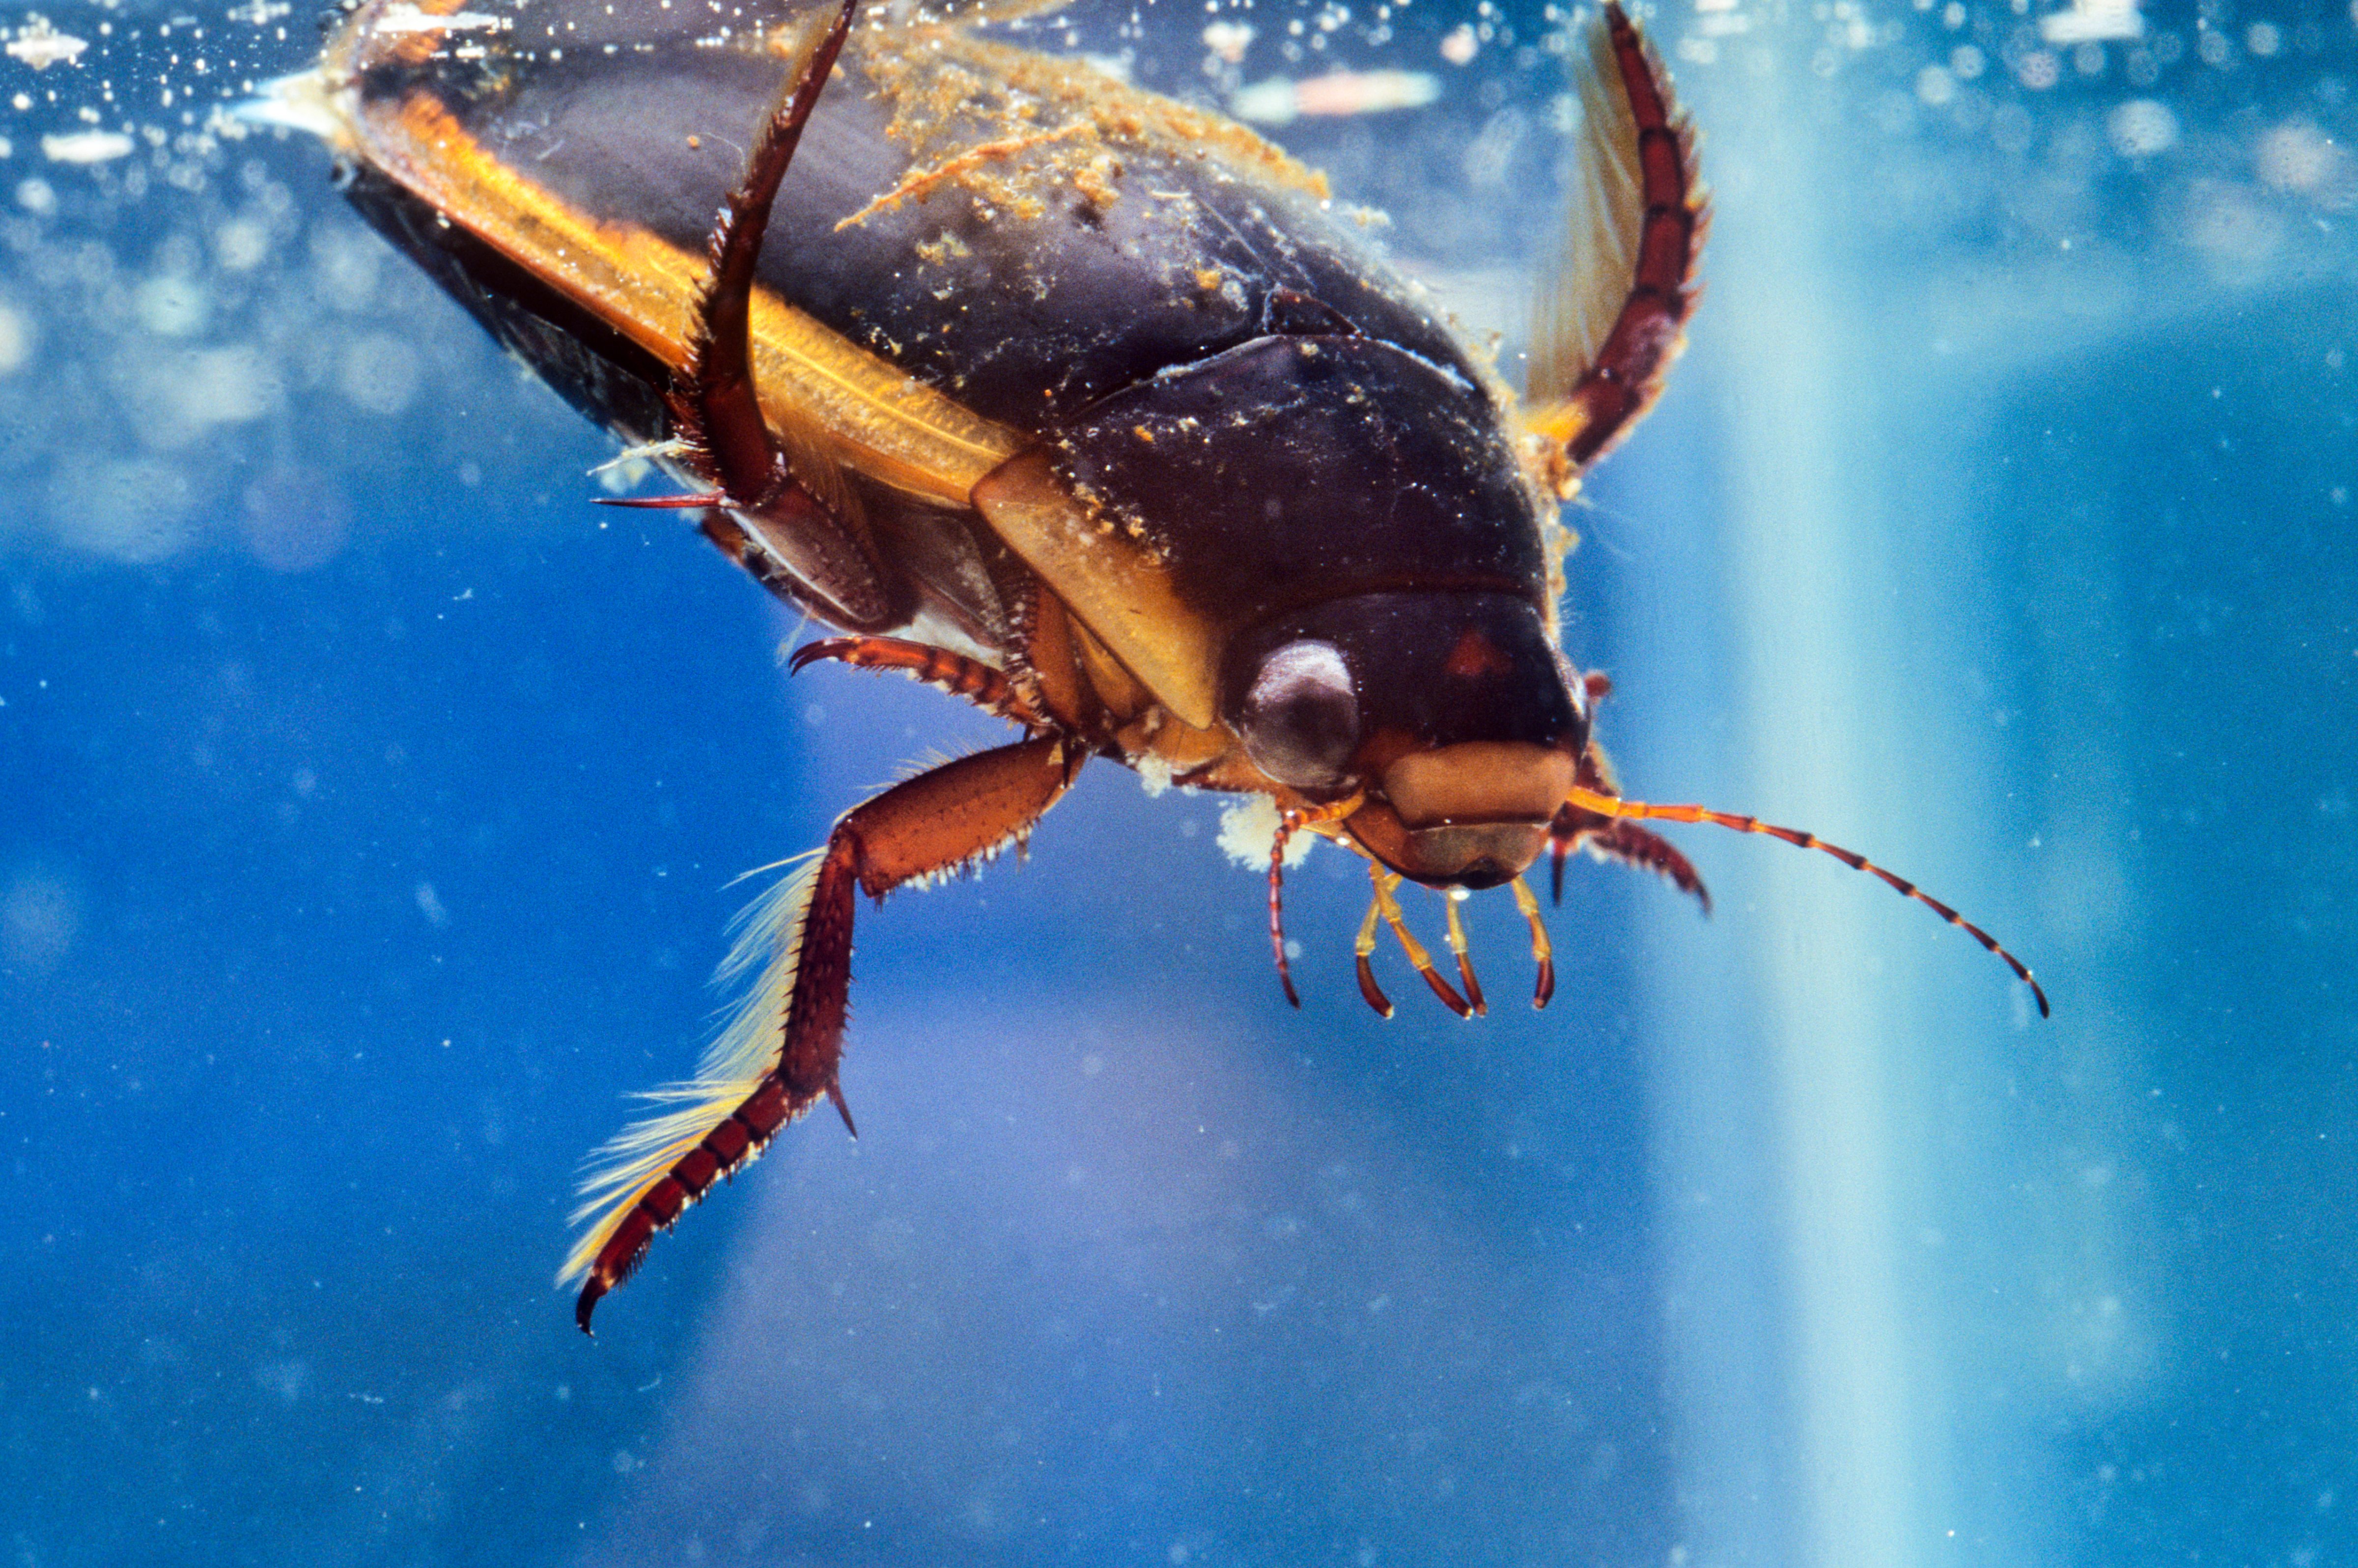 A large Diving Beetle plunges into the water. (Barrett &amp; MacKay&mdash;Getty Images/All Canada Photos)